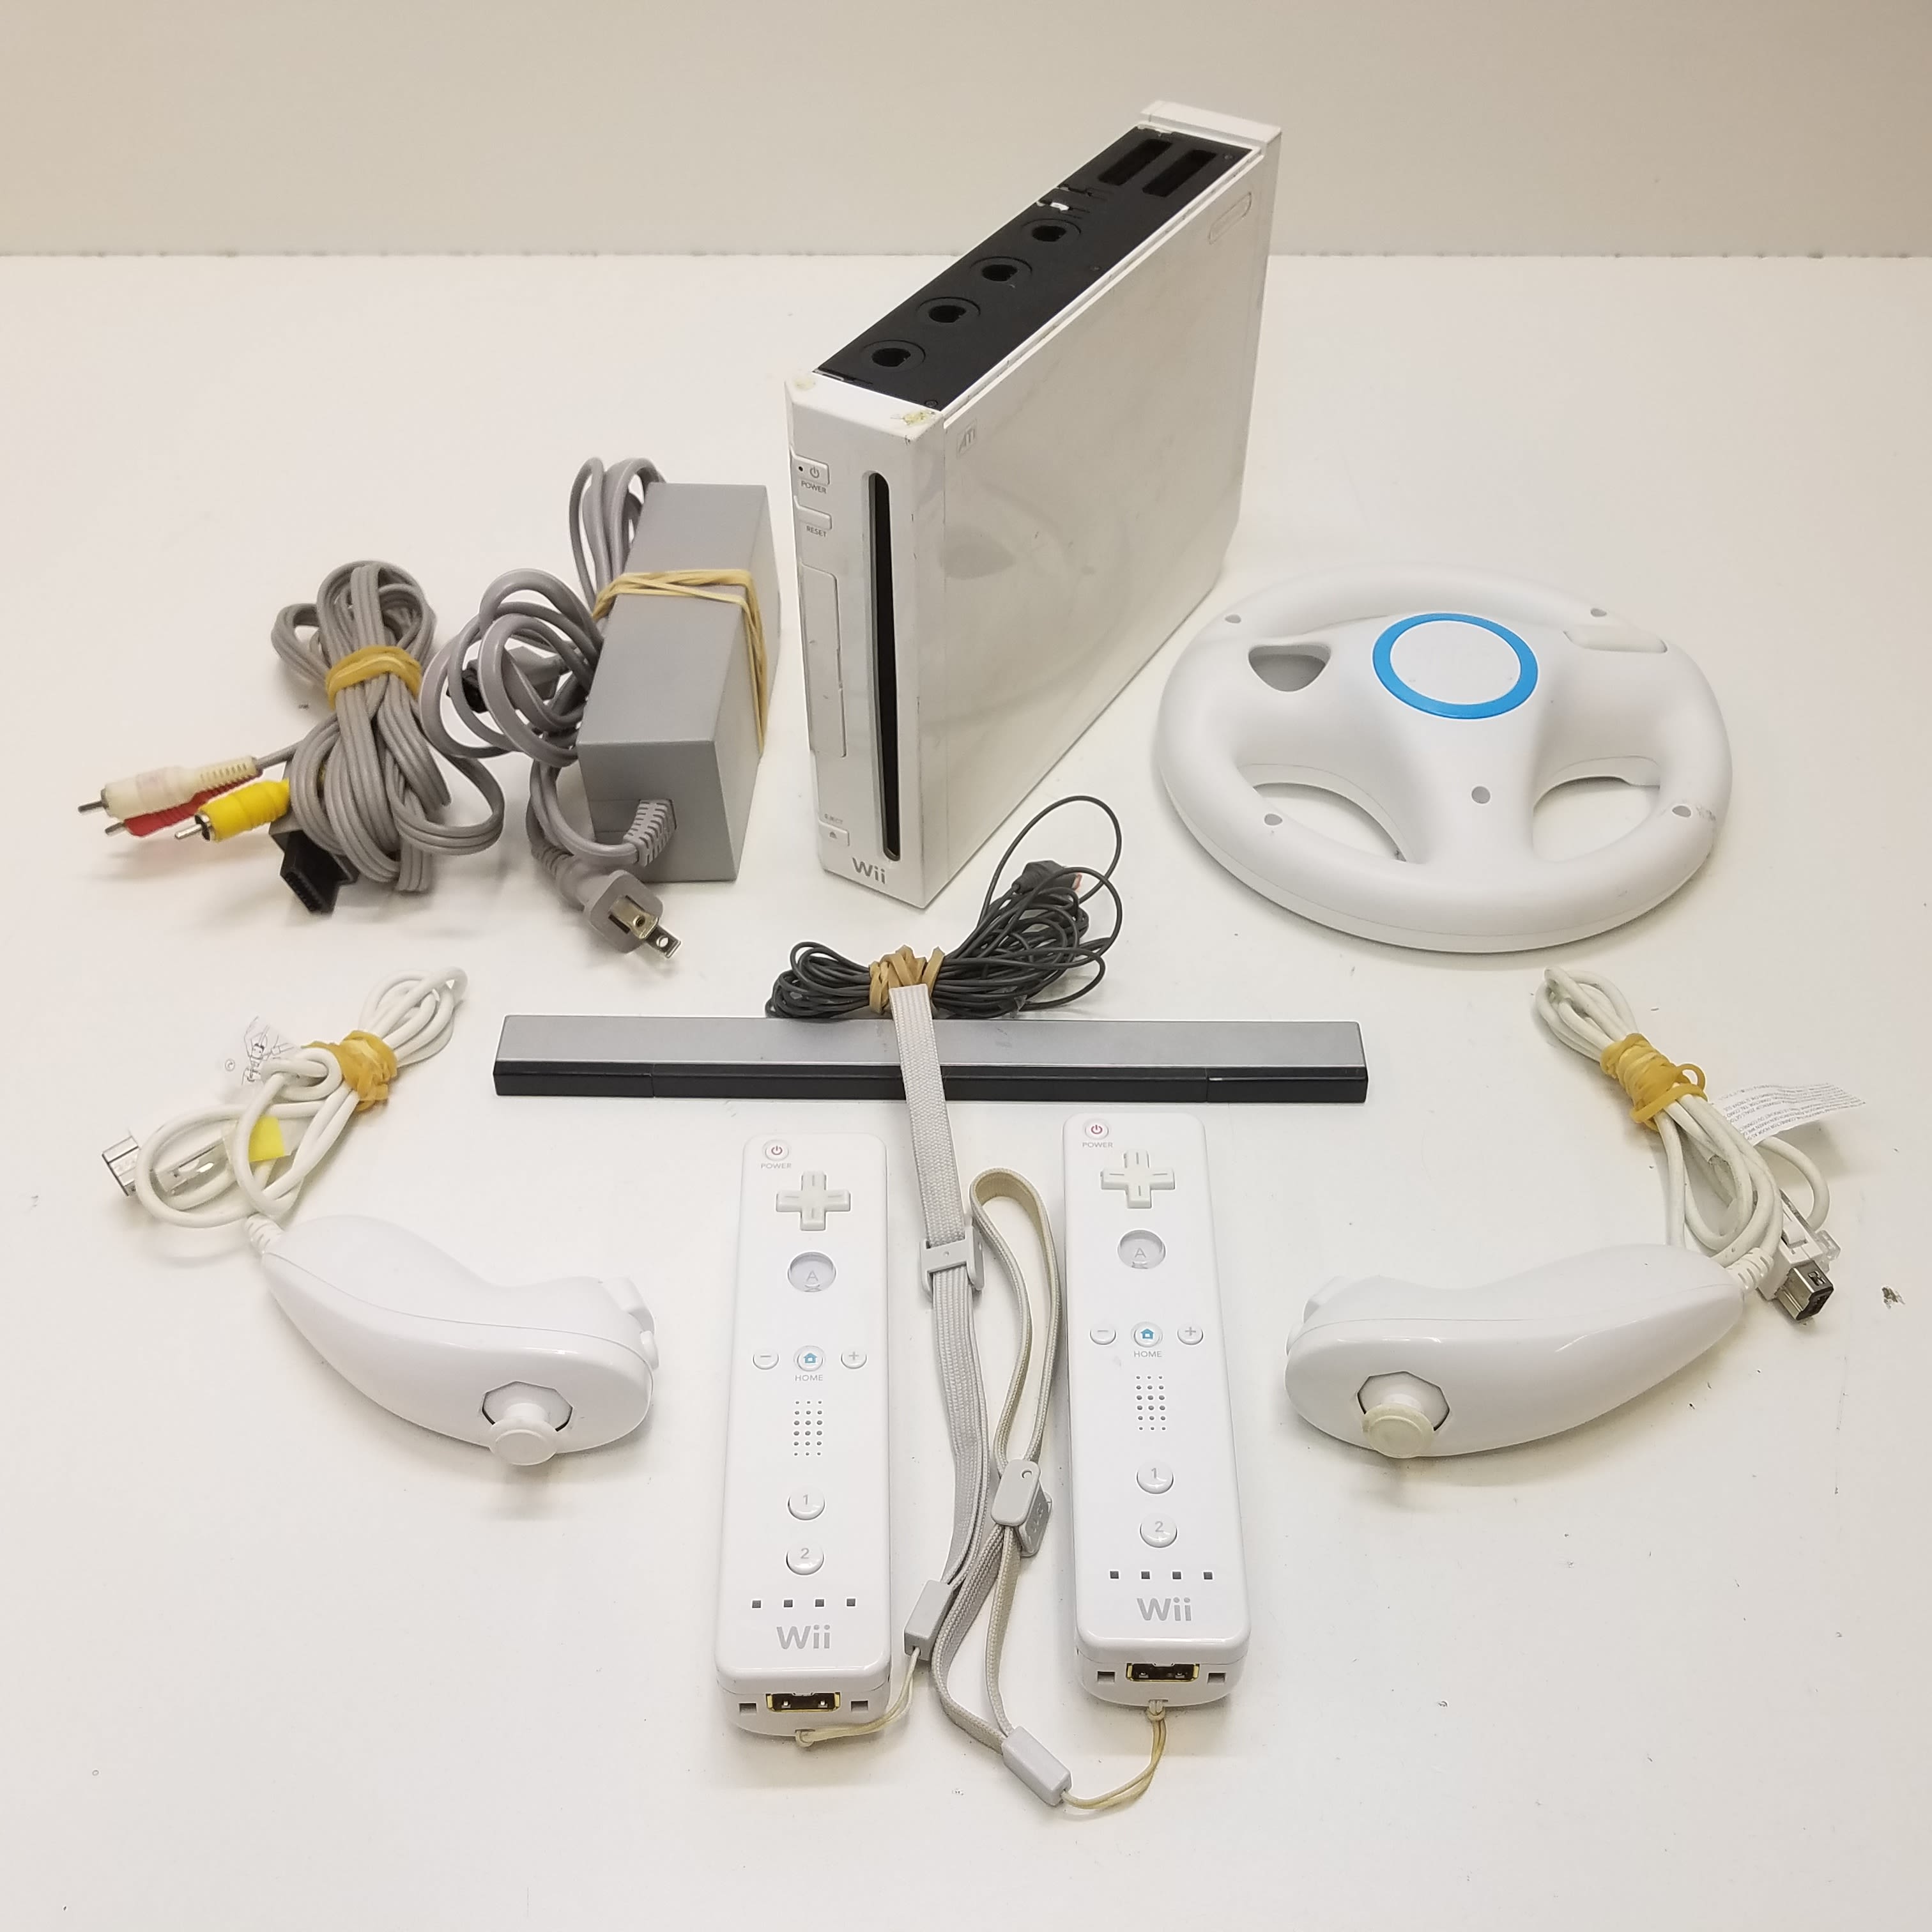 Buy the Nintendo Wii Console W/ Accessories